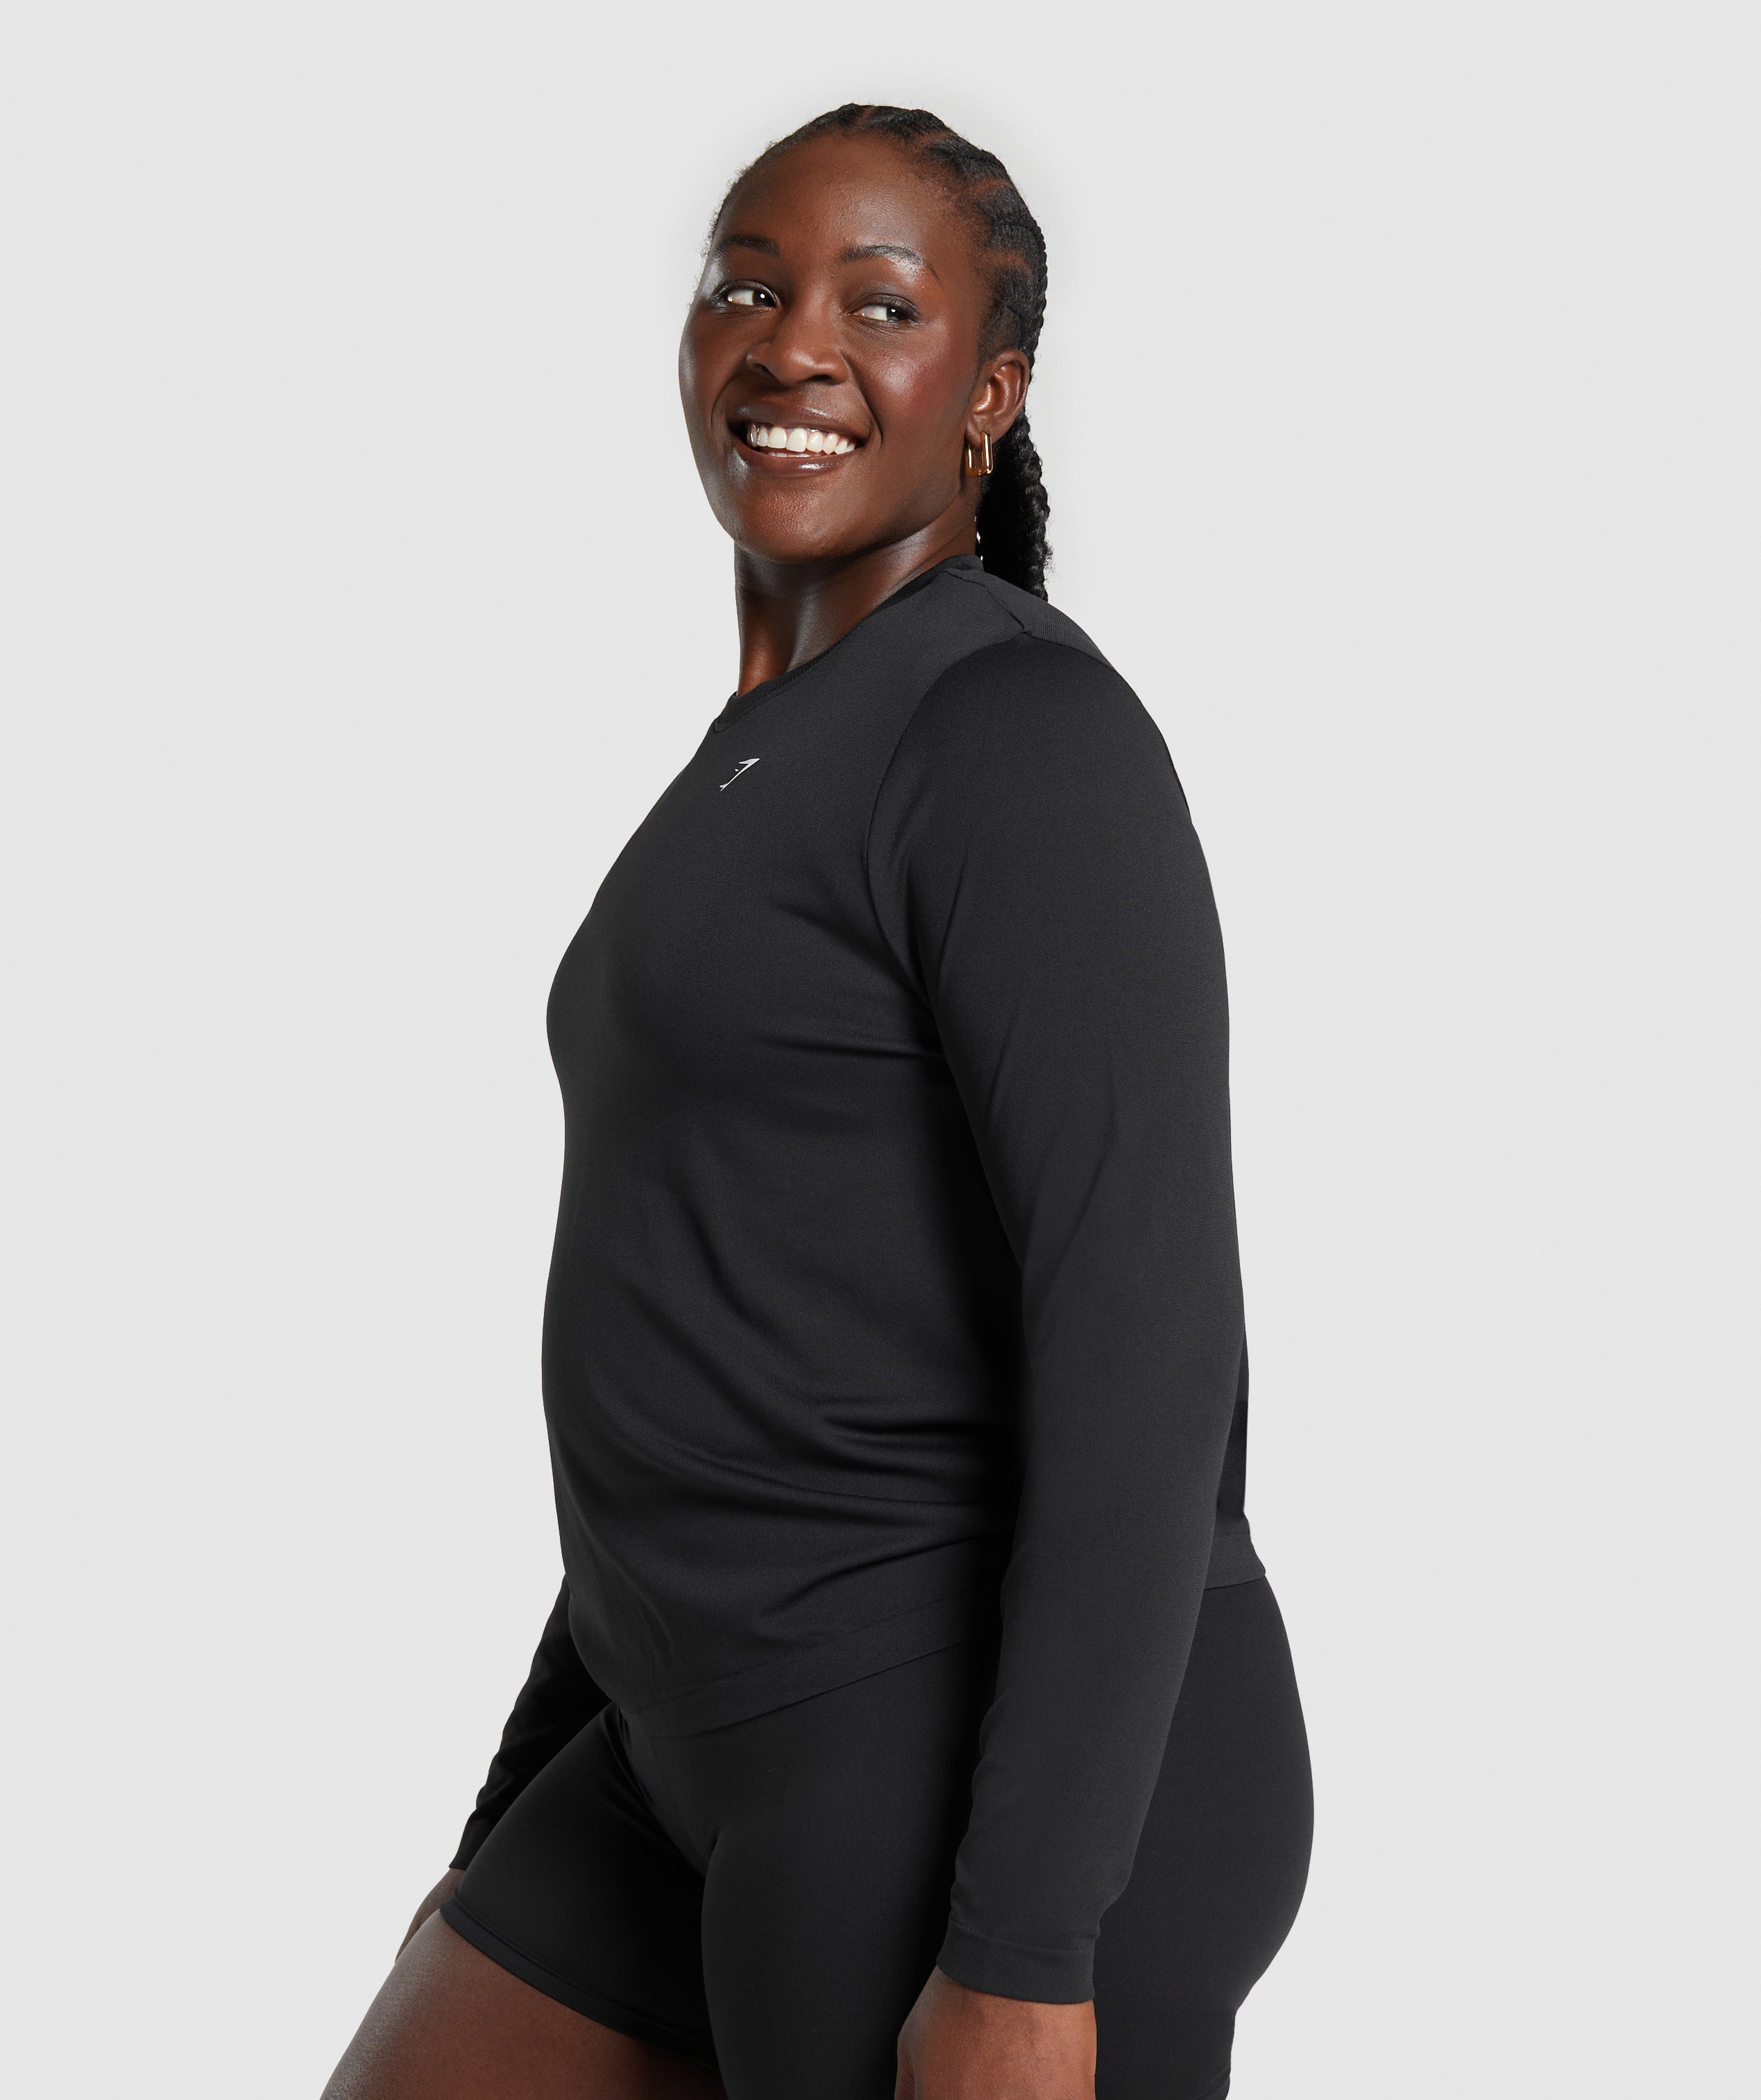 Cotton On Body SEAMLESS ZIP FRONT LONG SLEEVE - Long sleeved top - black 